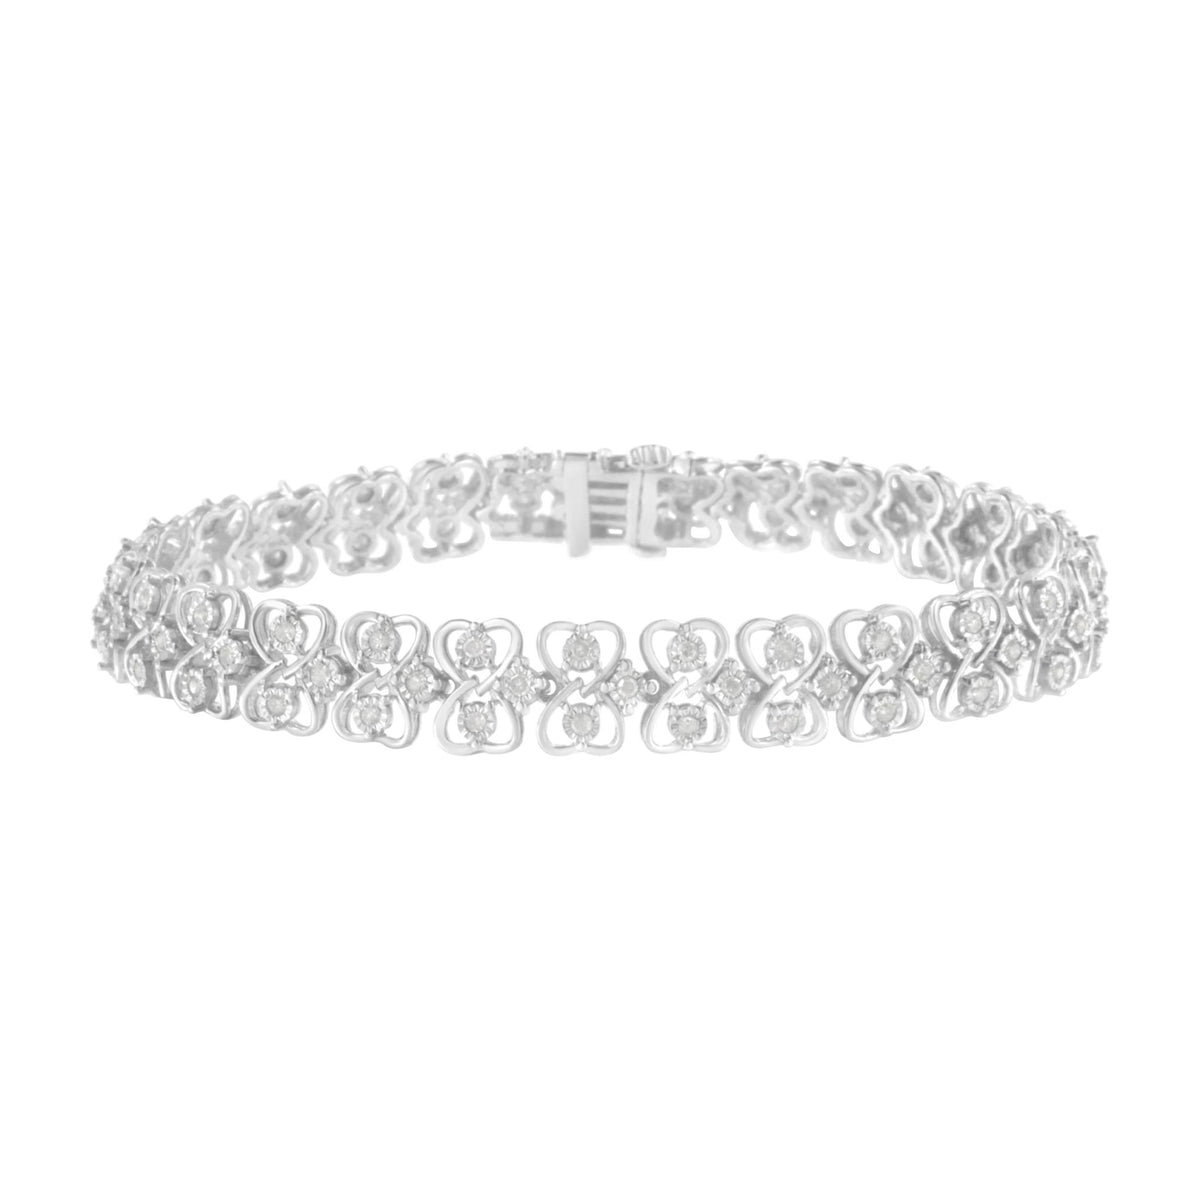 .925 Sterling Silver 1.0 cttw Round-cut Diamond 2-Row Heart Link Tennis Bracelet (I-J Clarity, I2-I3 Color) - Size 7&quot; - LinkagejewelrydesignLinkagejewelrydesign